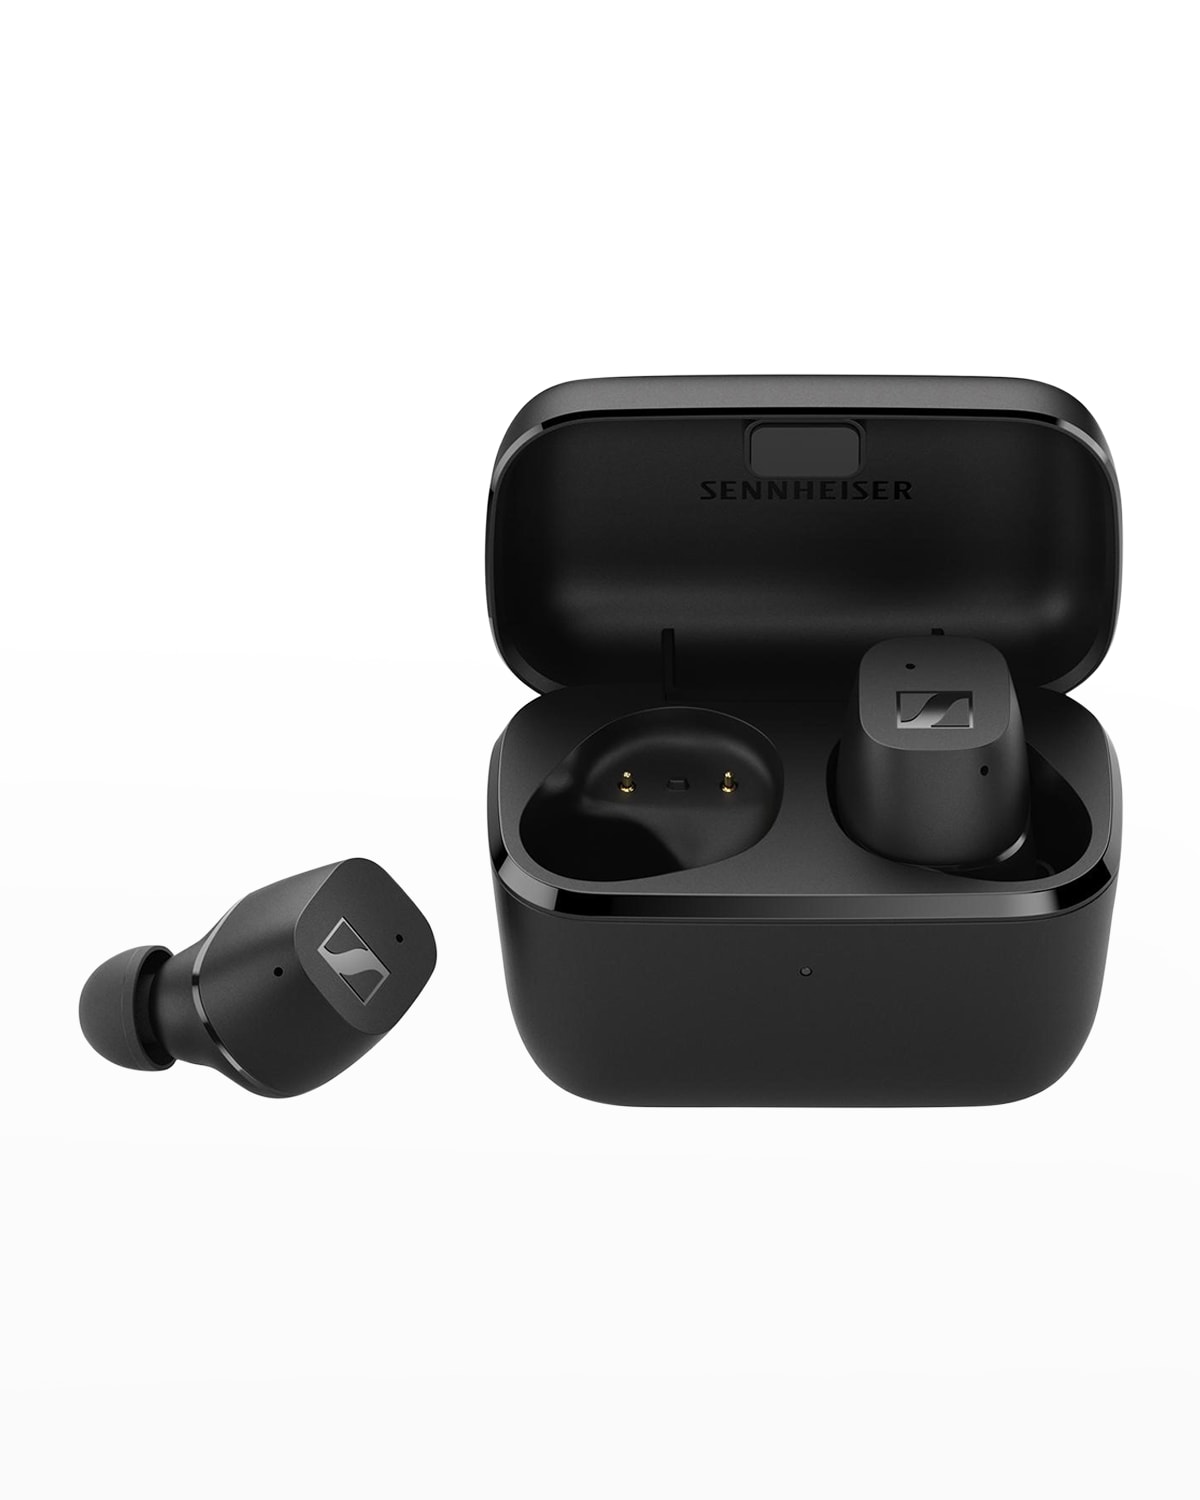 Sennheiser CX200TW1 True Wireless In-Ear Headphones with Passive Noise Cancellation